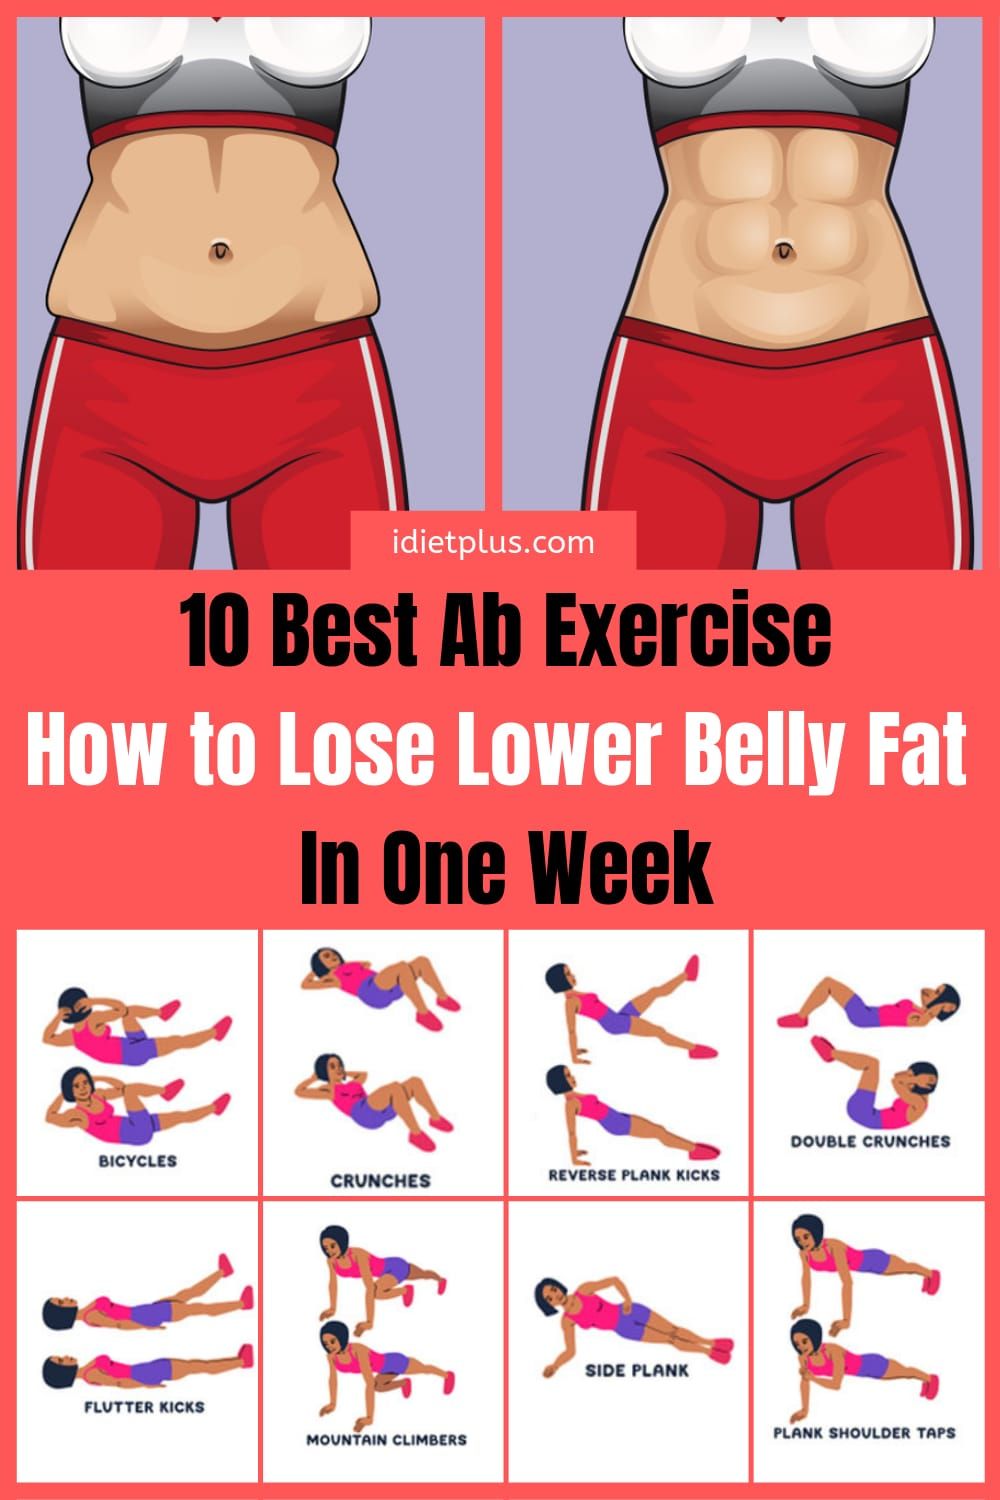 10 Best Ab Exercise